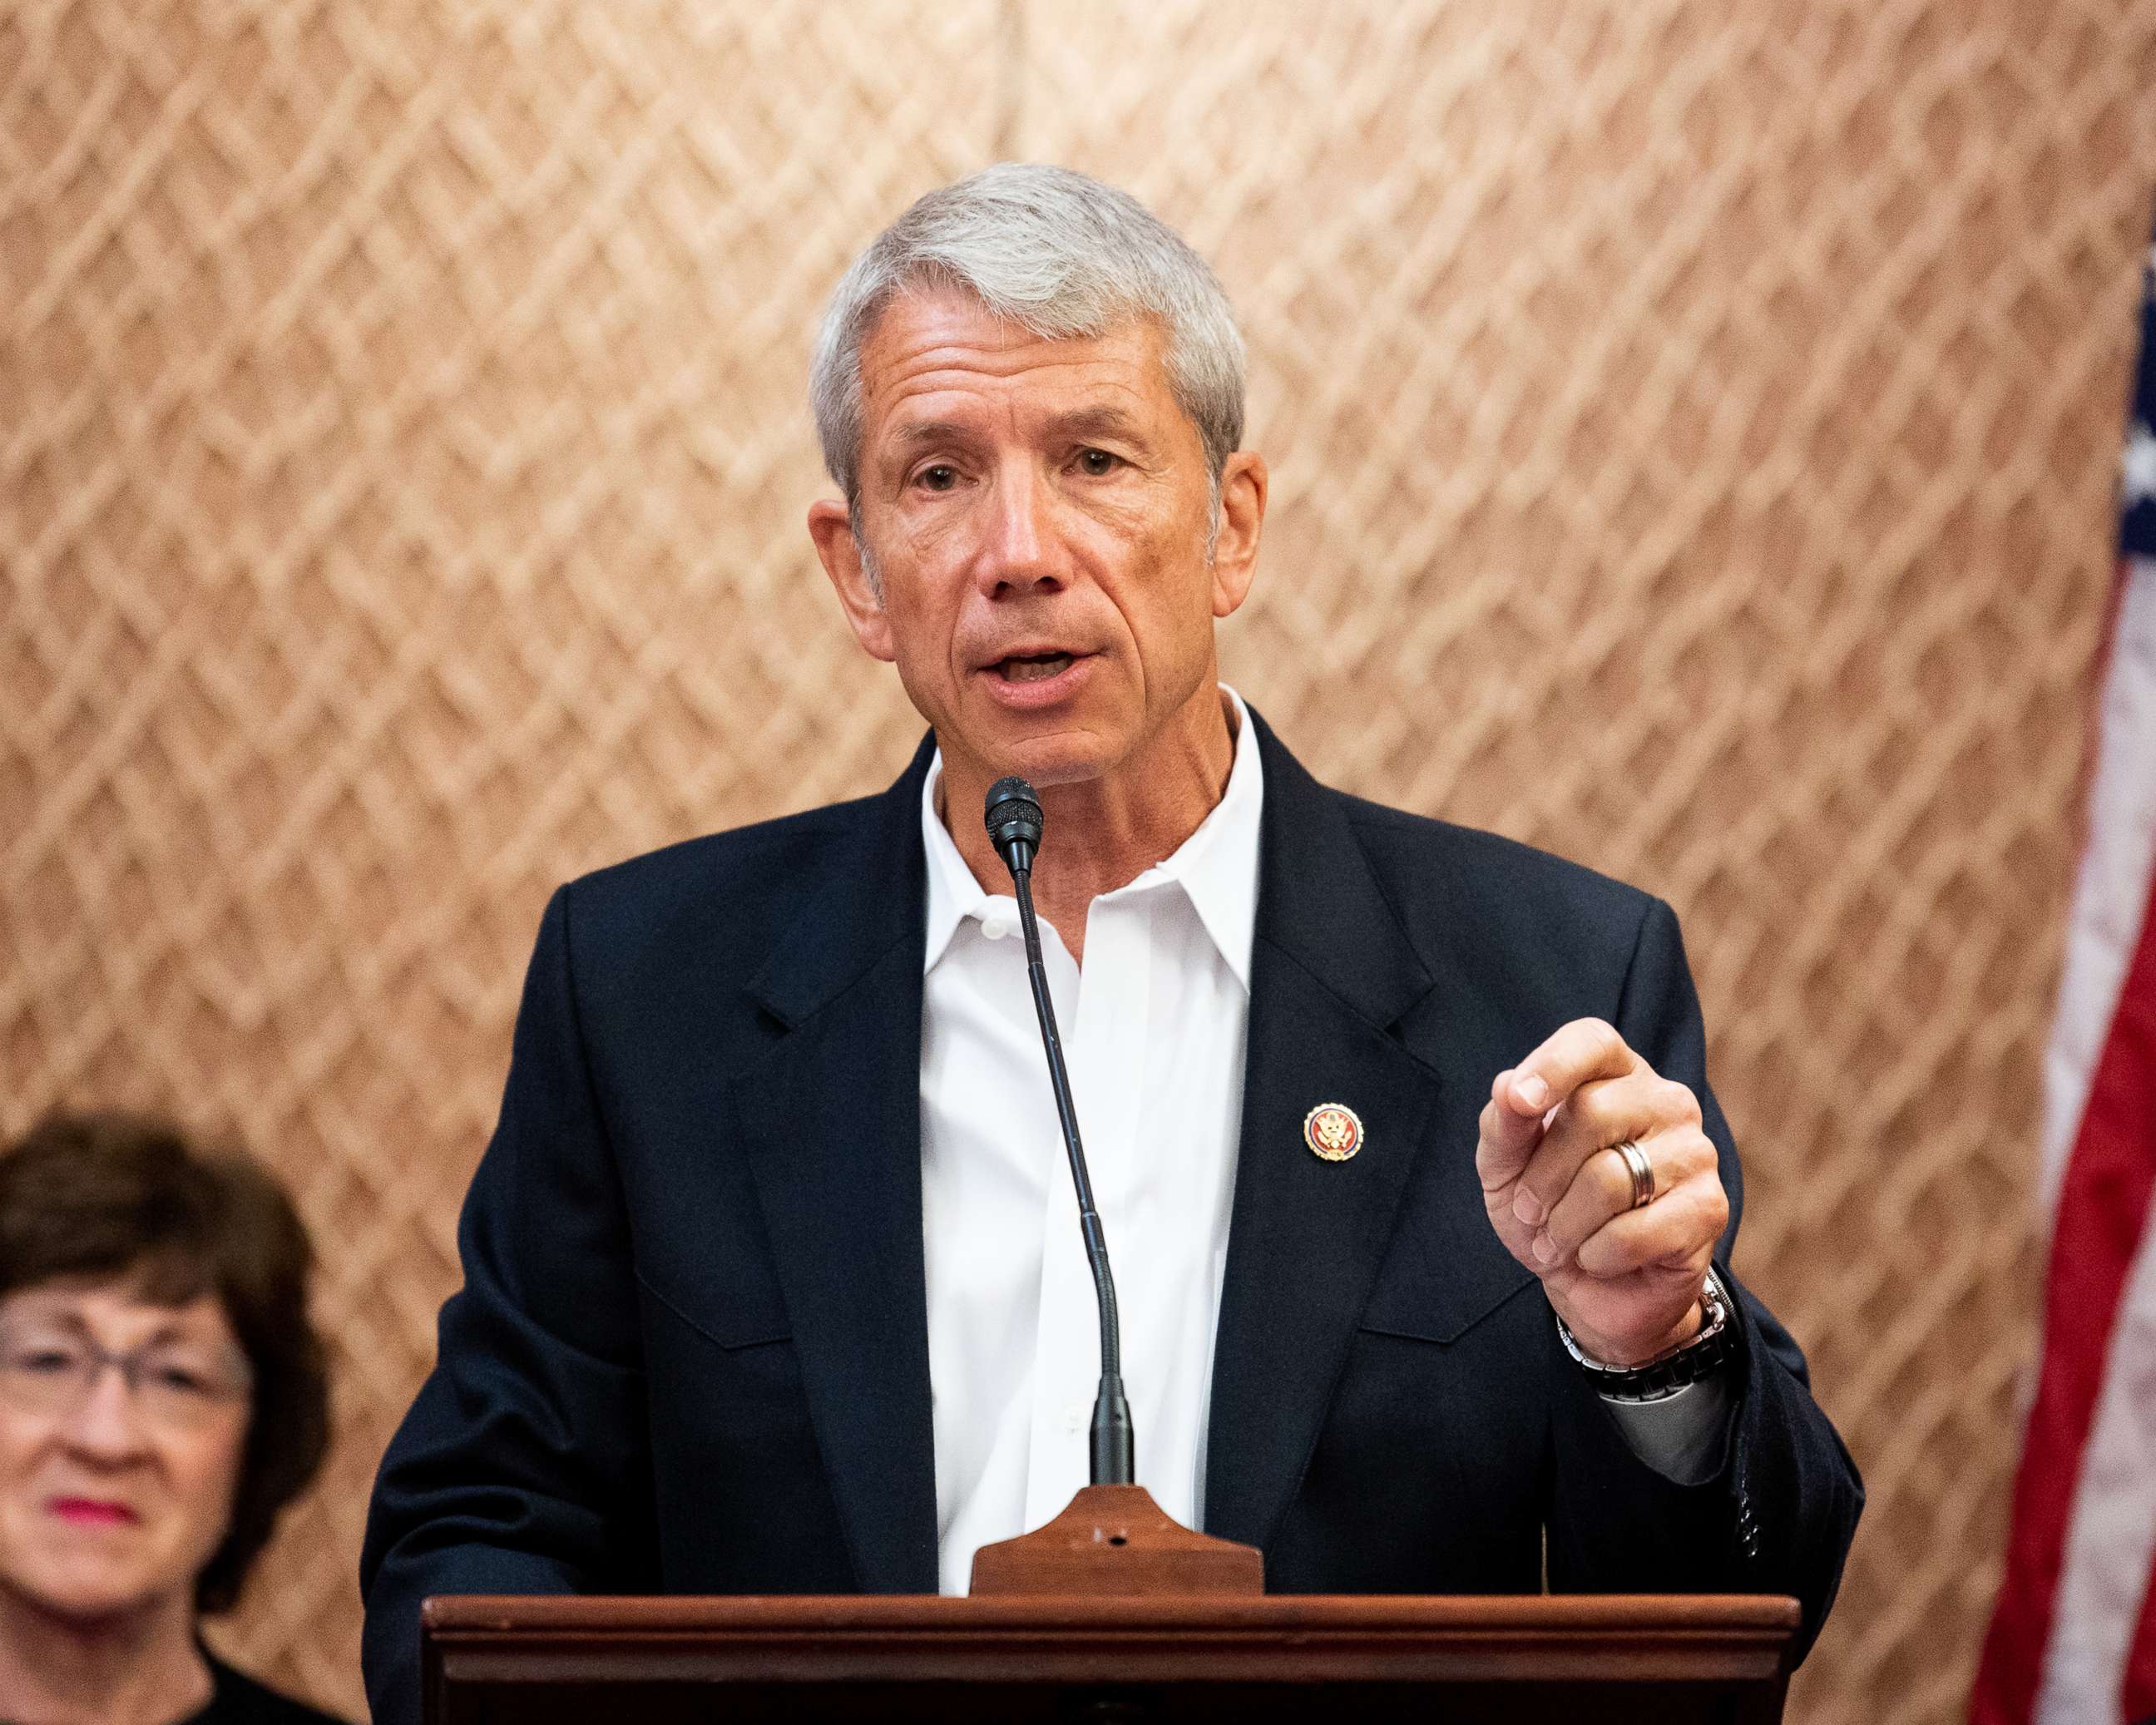 PHOTO: In this June 27, 2019, file photo, Representative Kurt Schrader speaks at a press conference at the U.S. Capitol in Washington, D.C.